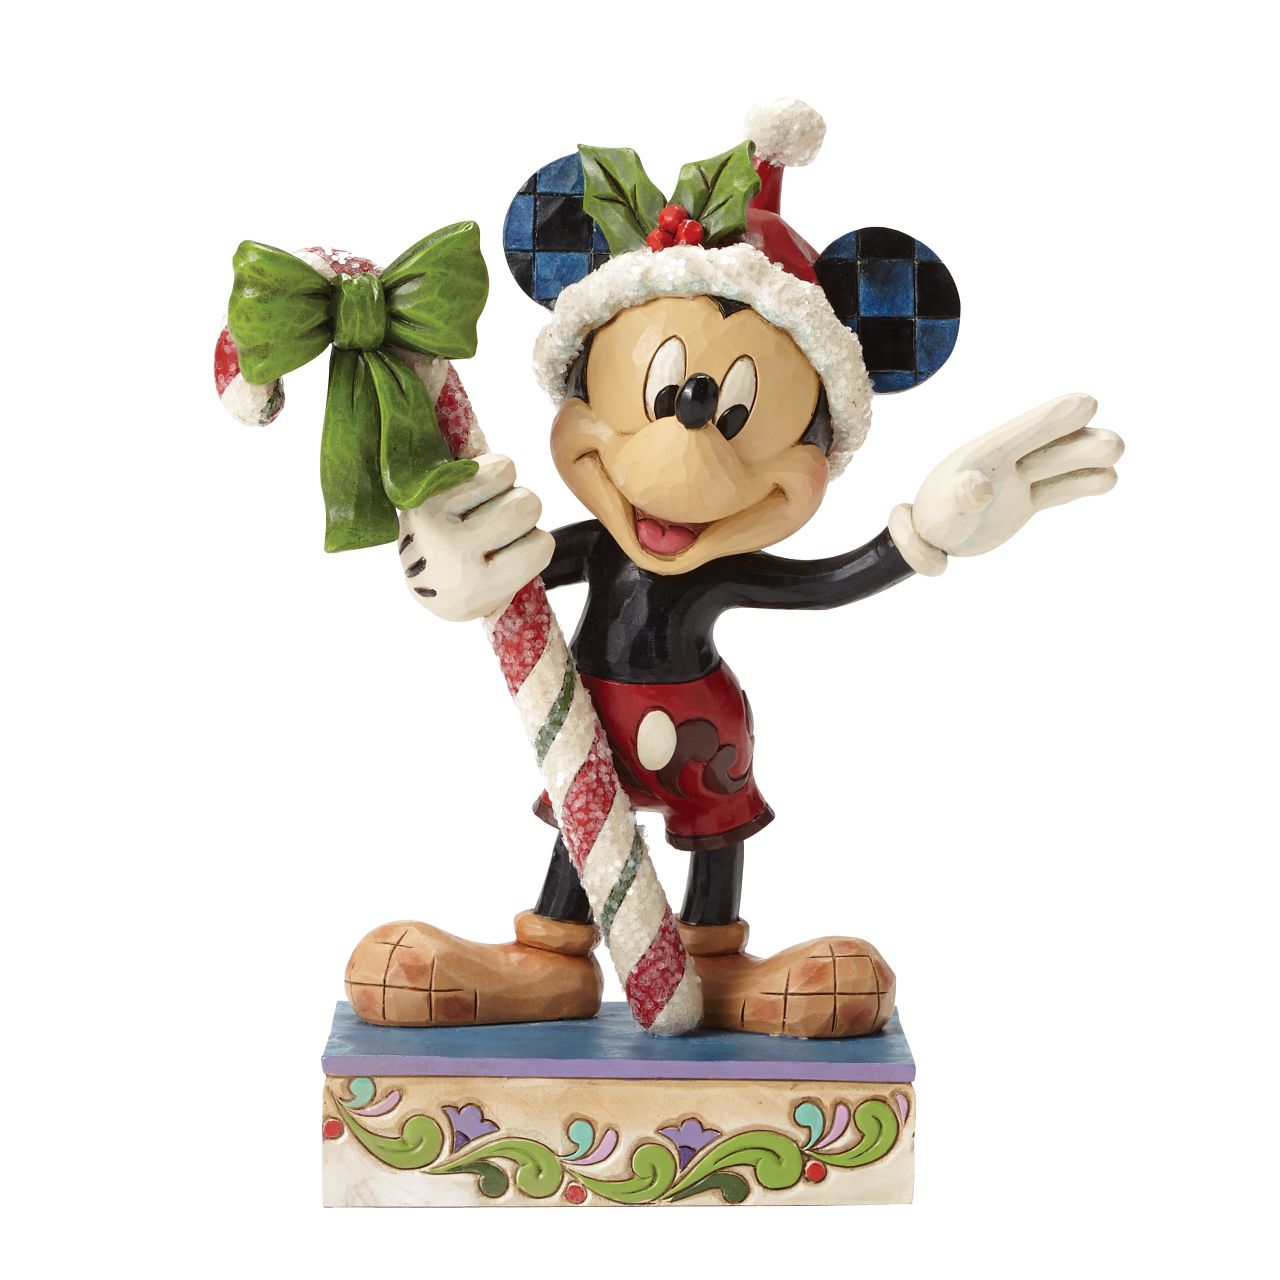 Disney Mickey Mouse Candy Cane Figurine  "Sweet Greetings" A jolly Mickey Mouse brings a gift of sugar coated candy in this delightful Christmas design from the artistry of Jim Shore. Beautifully handcrafted, this eye-catching piece features the classic Disney character decorated in Jim's unique folk art style.